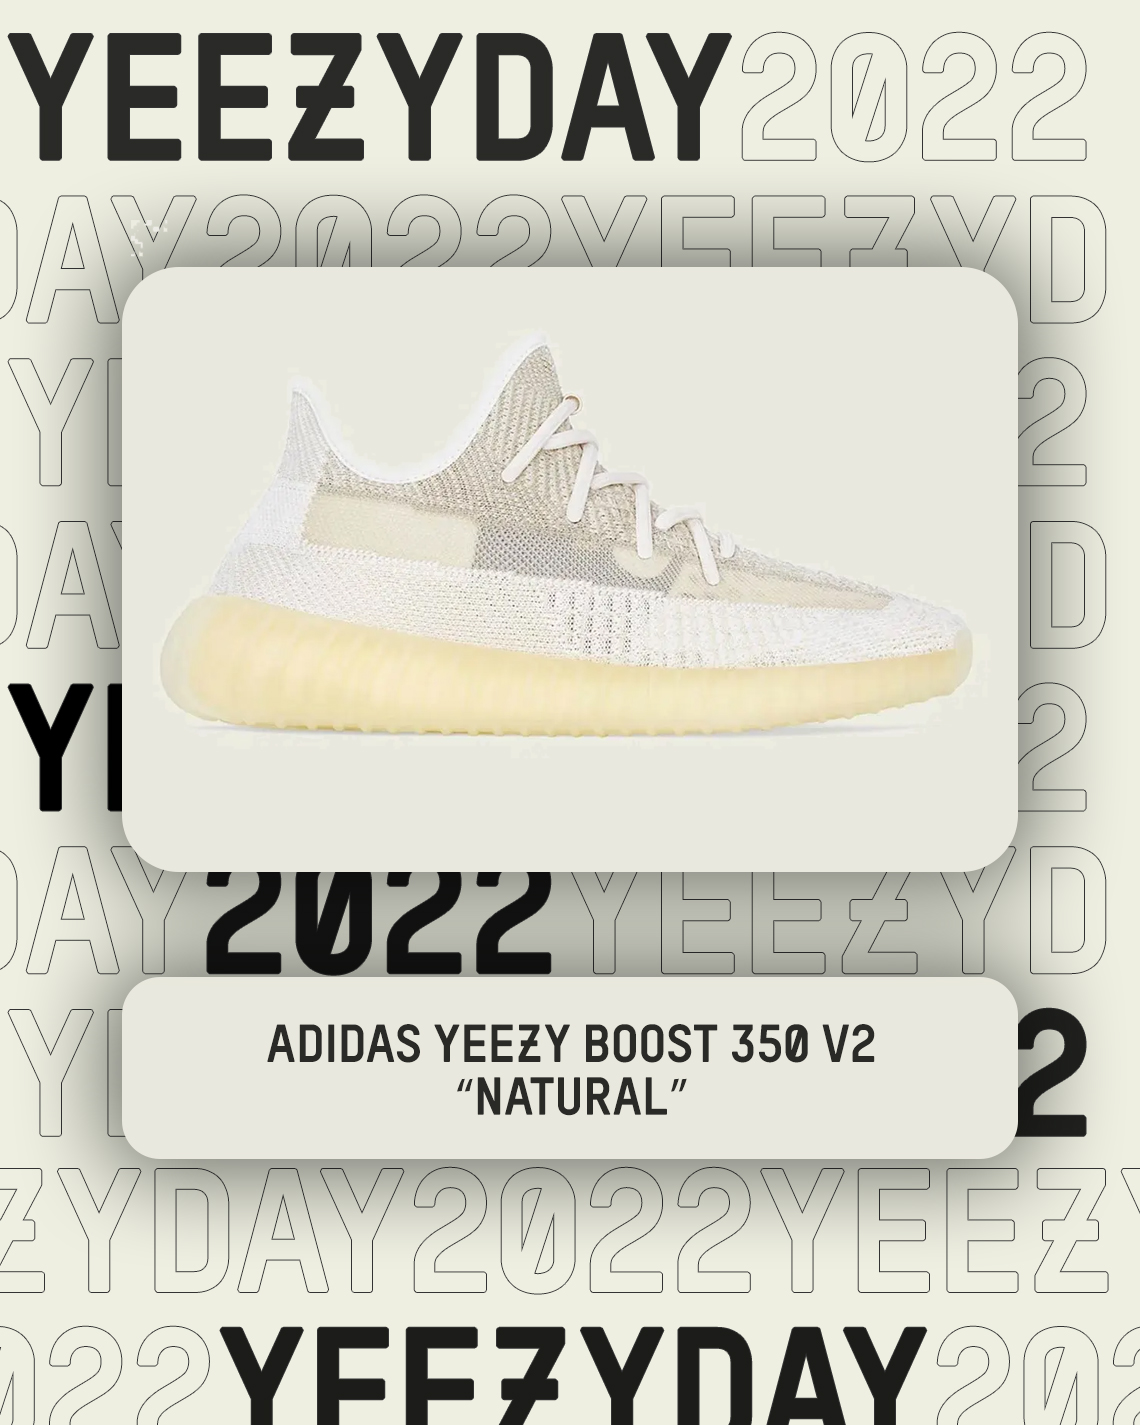 Yeezy Day 2022 Yeezy Boost 350 V2 Natural